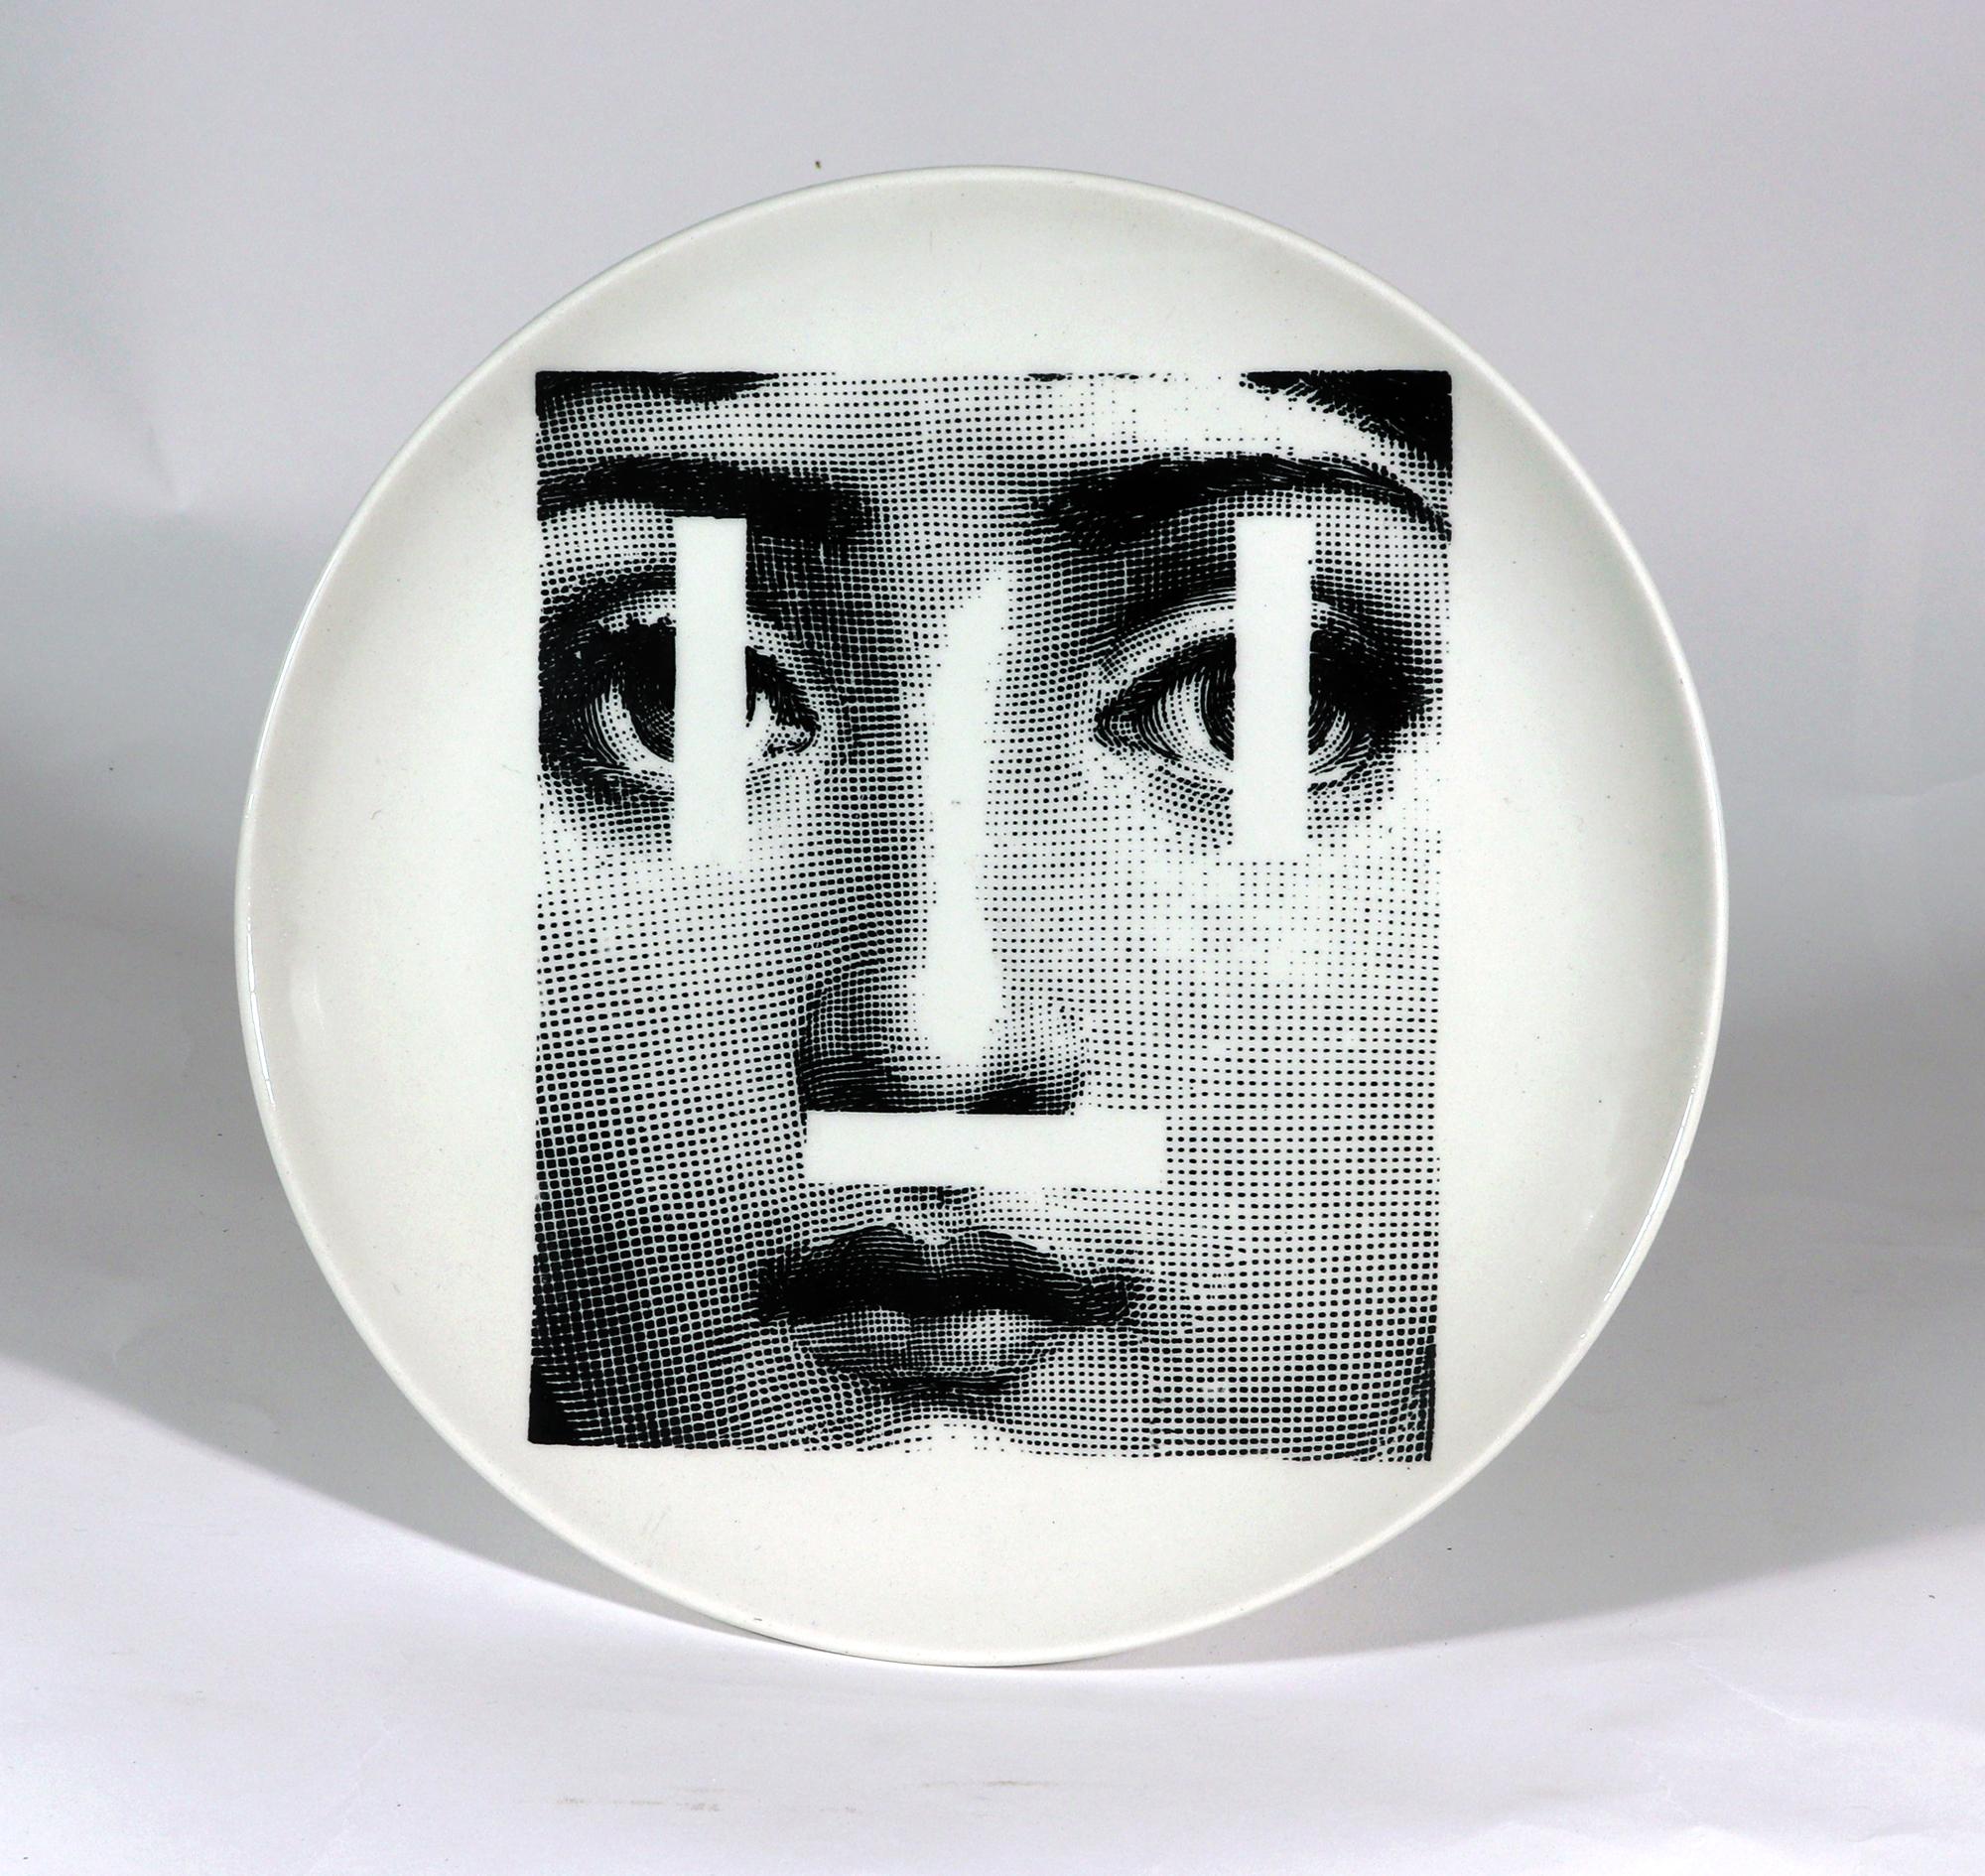 Piero Fornasetti pottery themes & variation plates
Patterns #27, 30, 58, 63, 67,& 70
Circa 1960s

The surreal Piero Fornasetti pottery plates in the Themes & Variations pattern are printed in black and white and each depicts the face of Lina